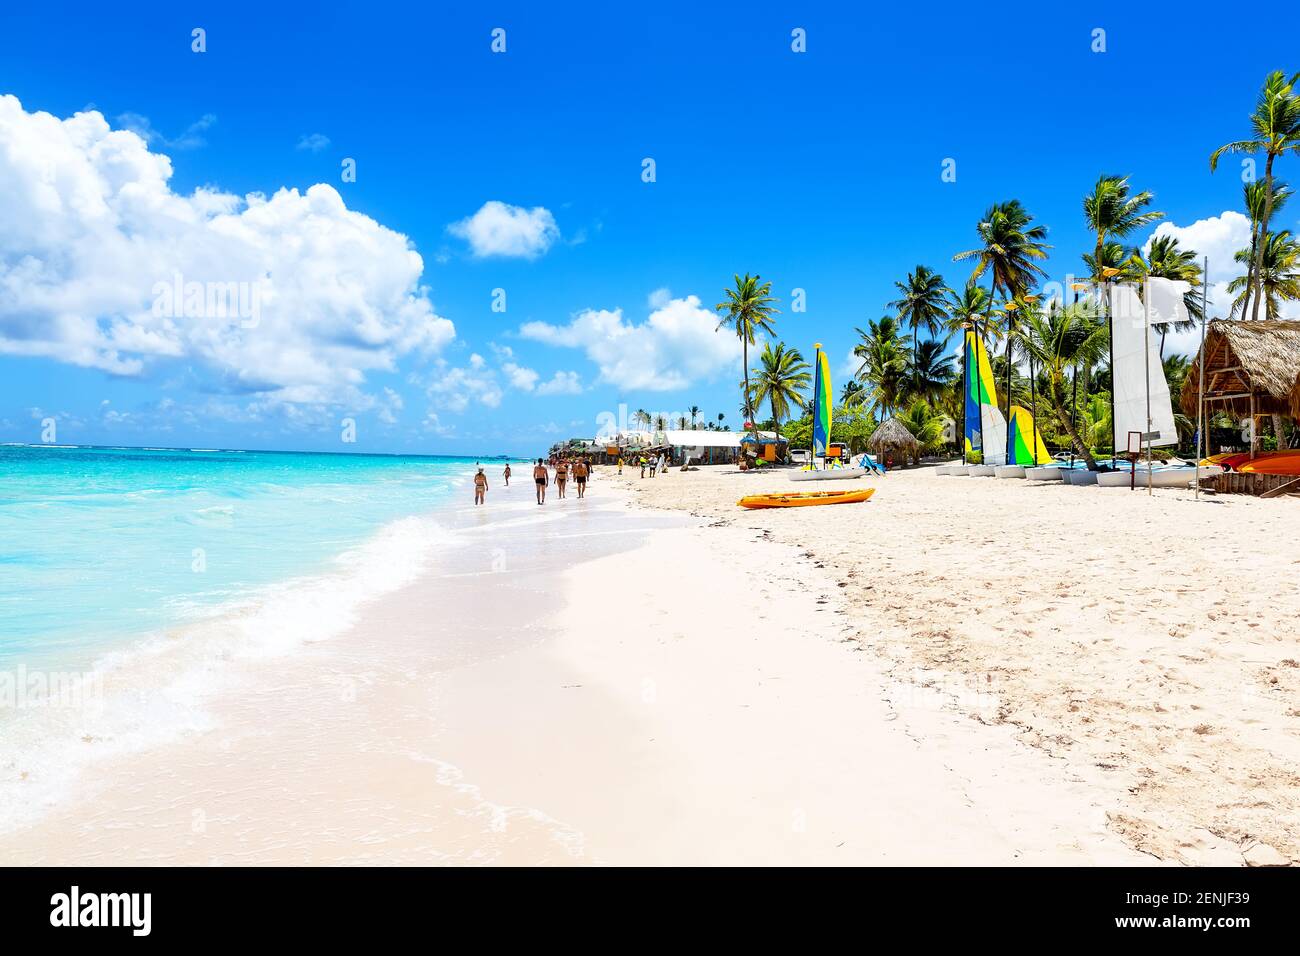 Coconut Palm trees on white sandy beach in Punta Cana, Dominican Republic.. Vacation holidays background wallpaper. View of nice tropical beach. Stock Photo